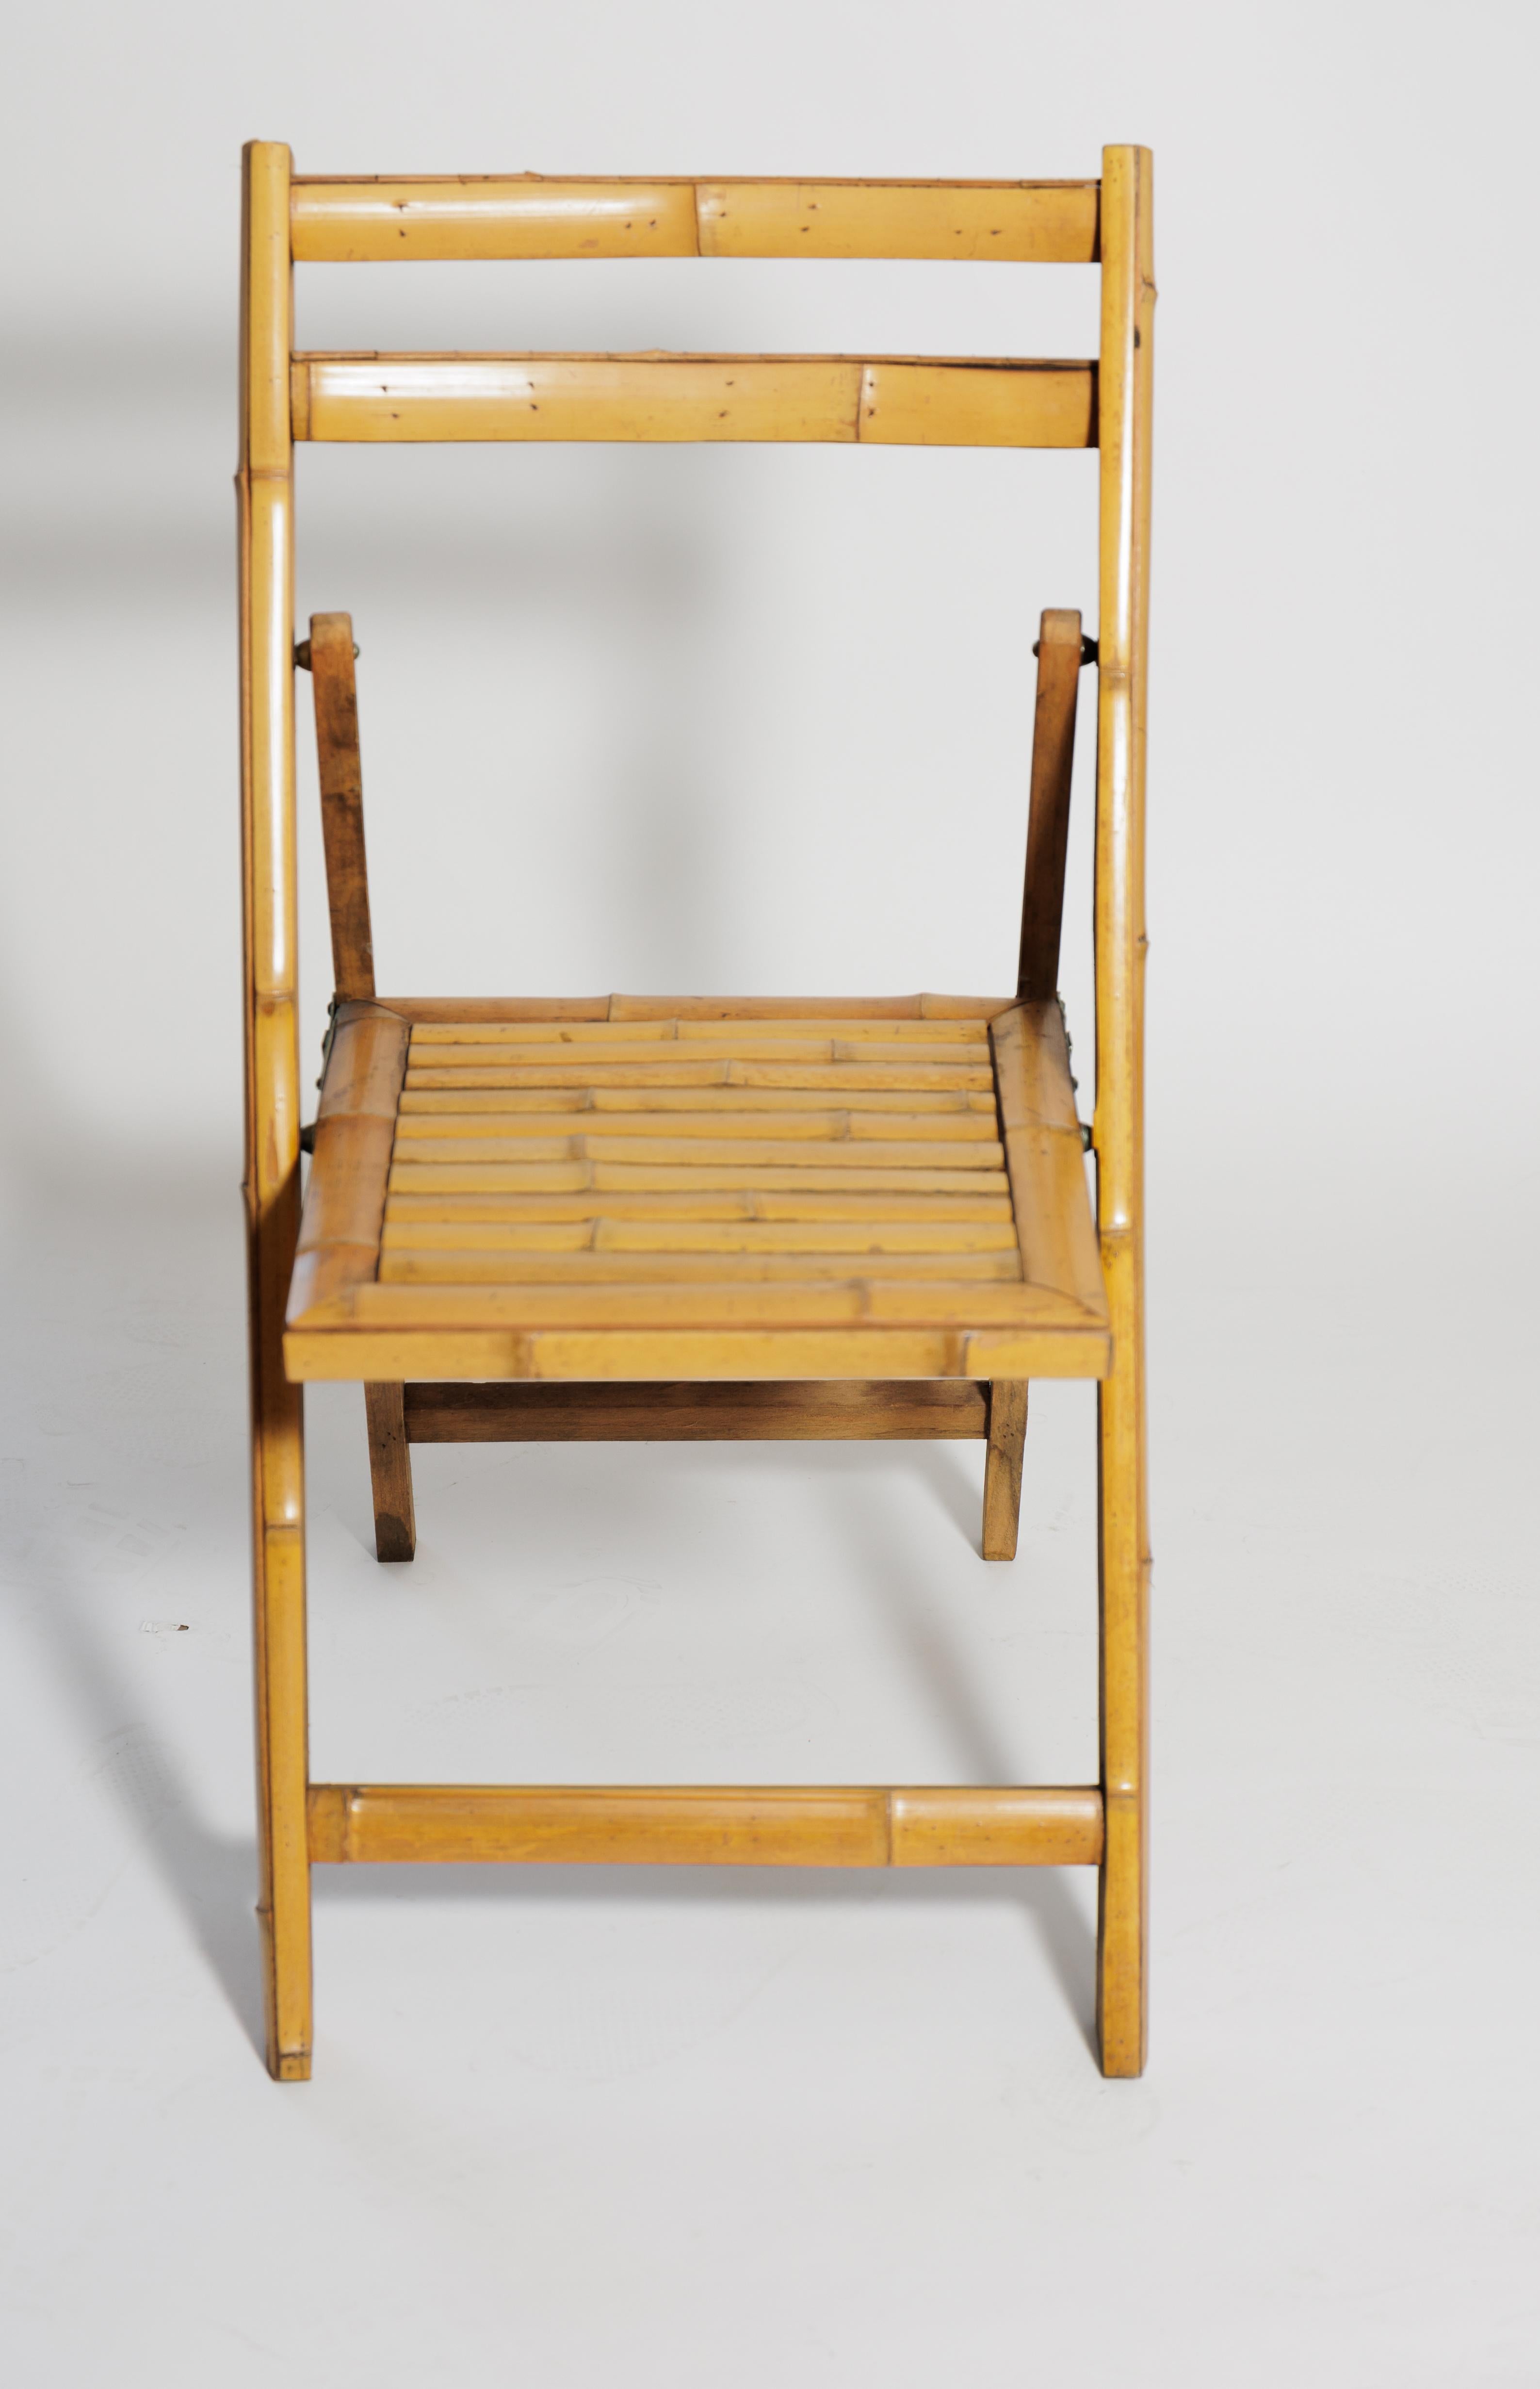 Set of six bamboo folding chairs which are quite attractive whenever you
need extra seating.